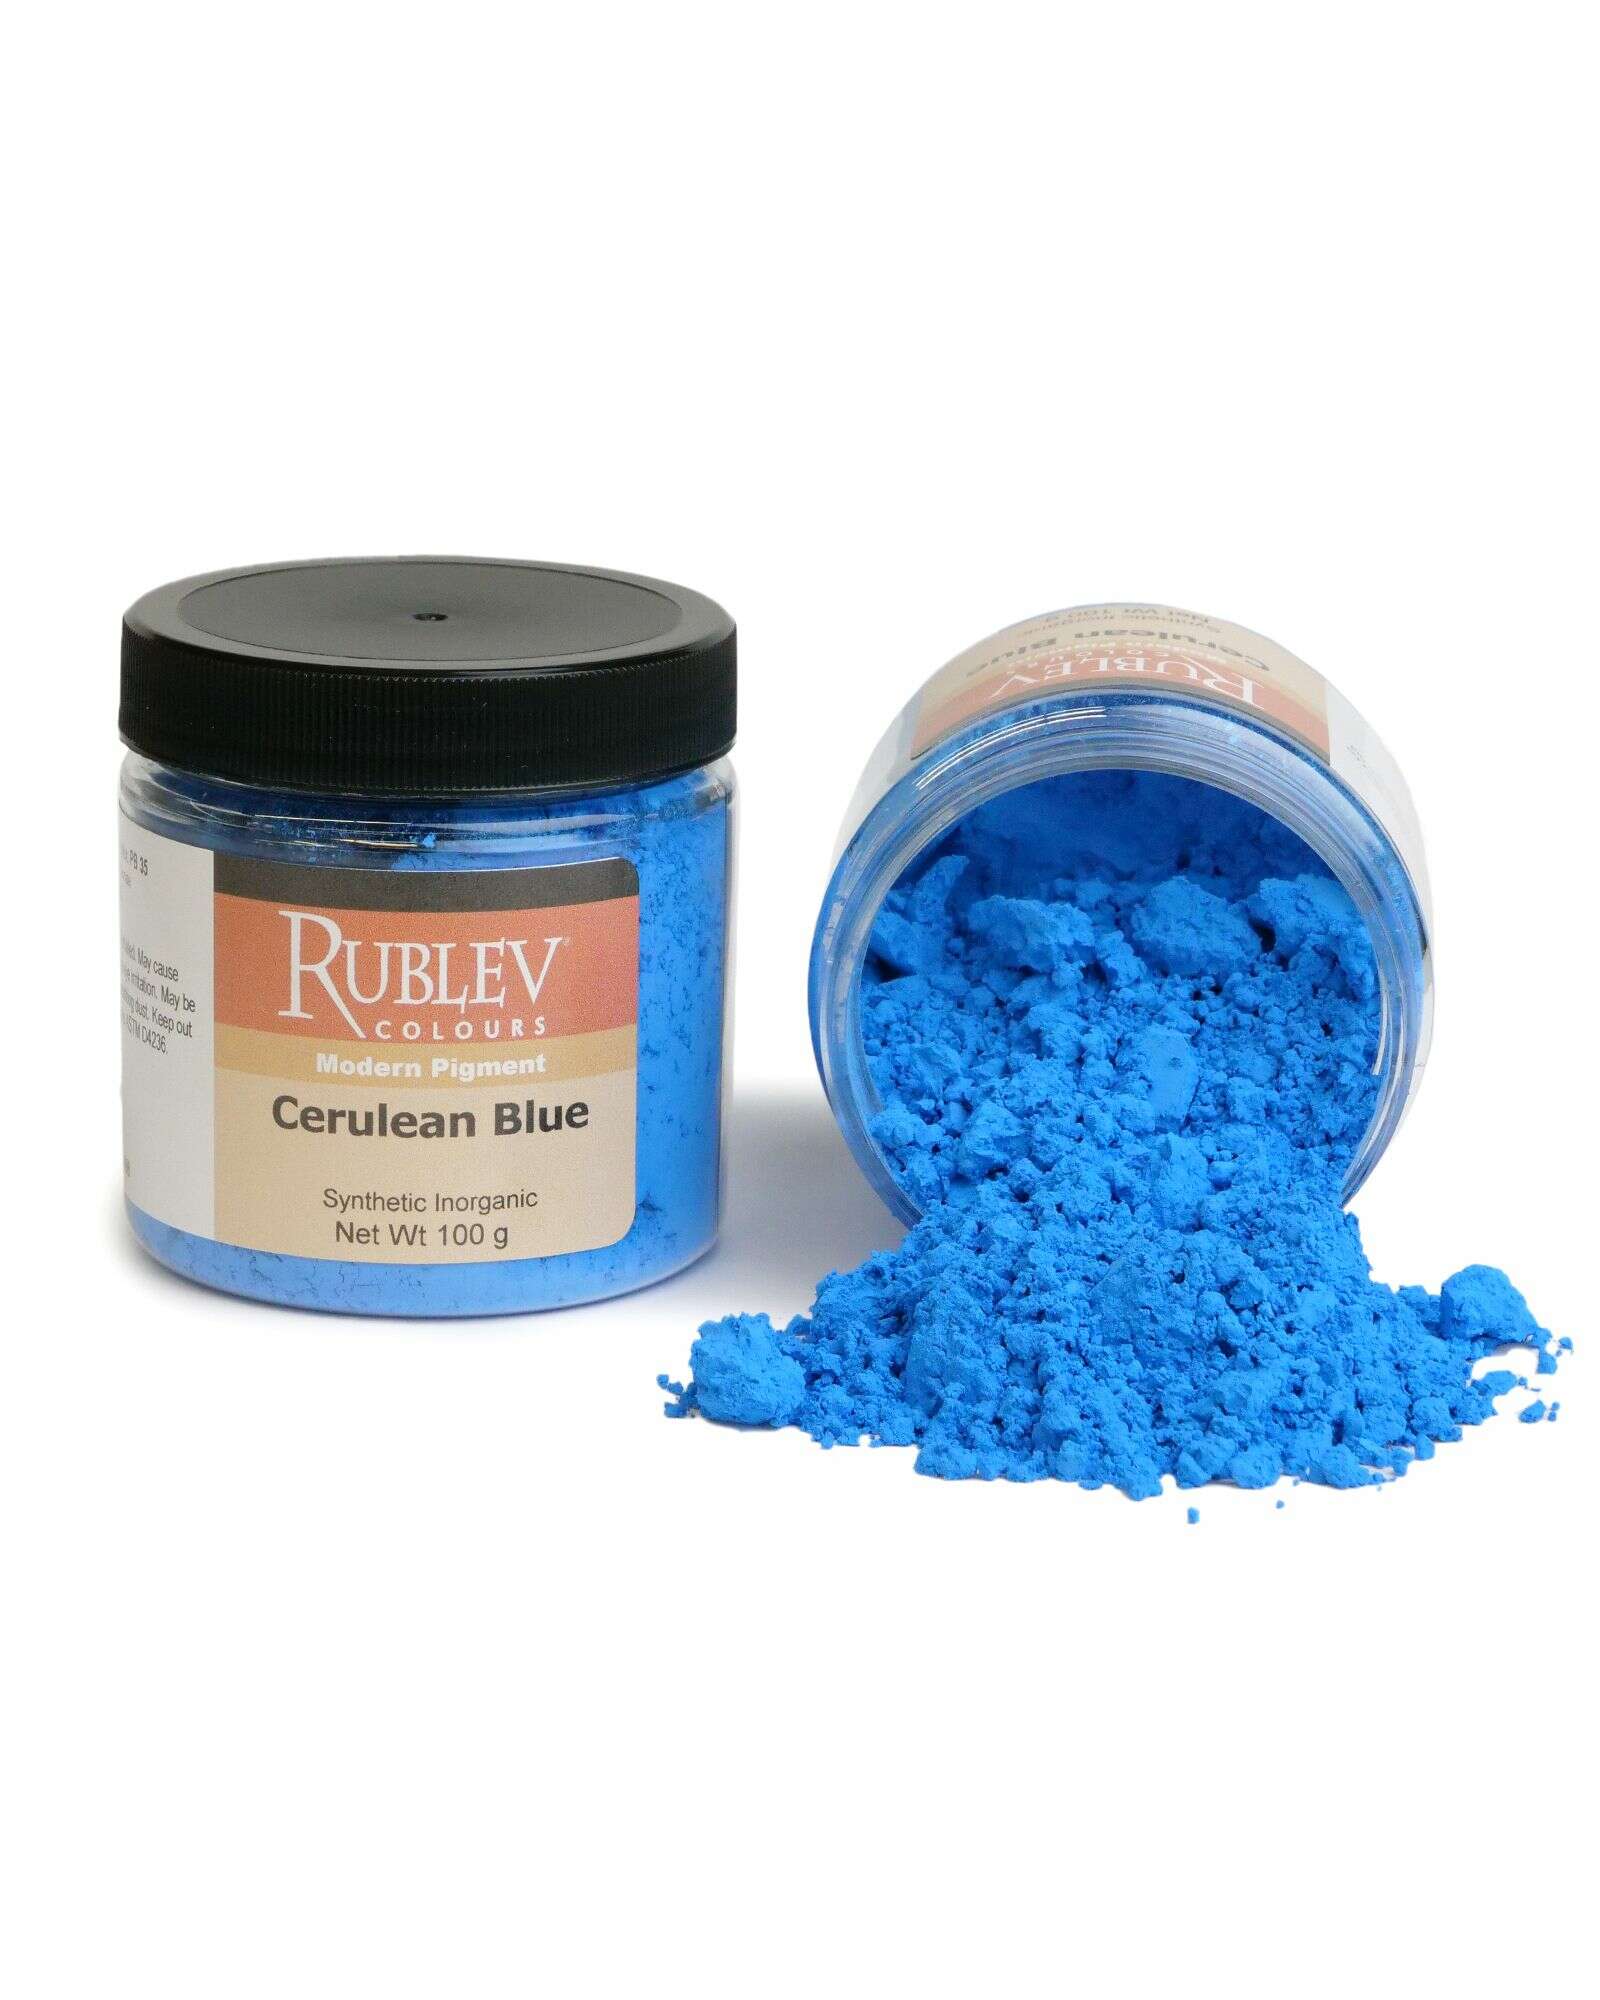 What is the color of Cerulean Blue?